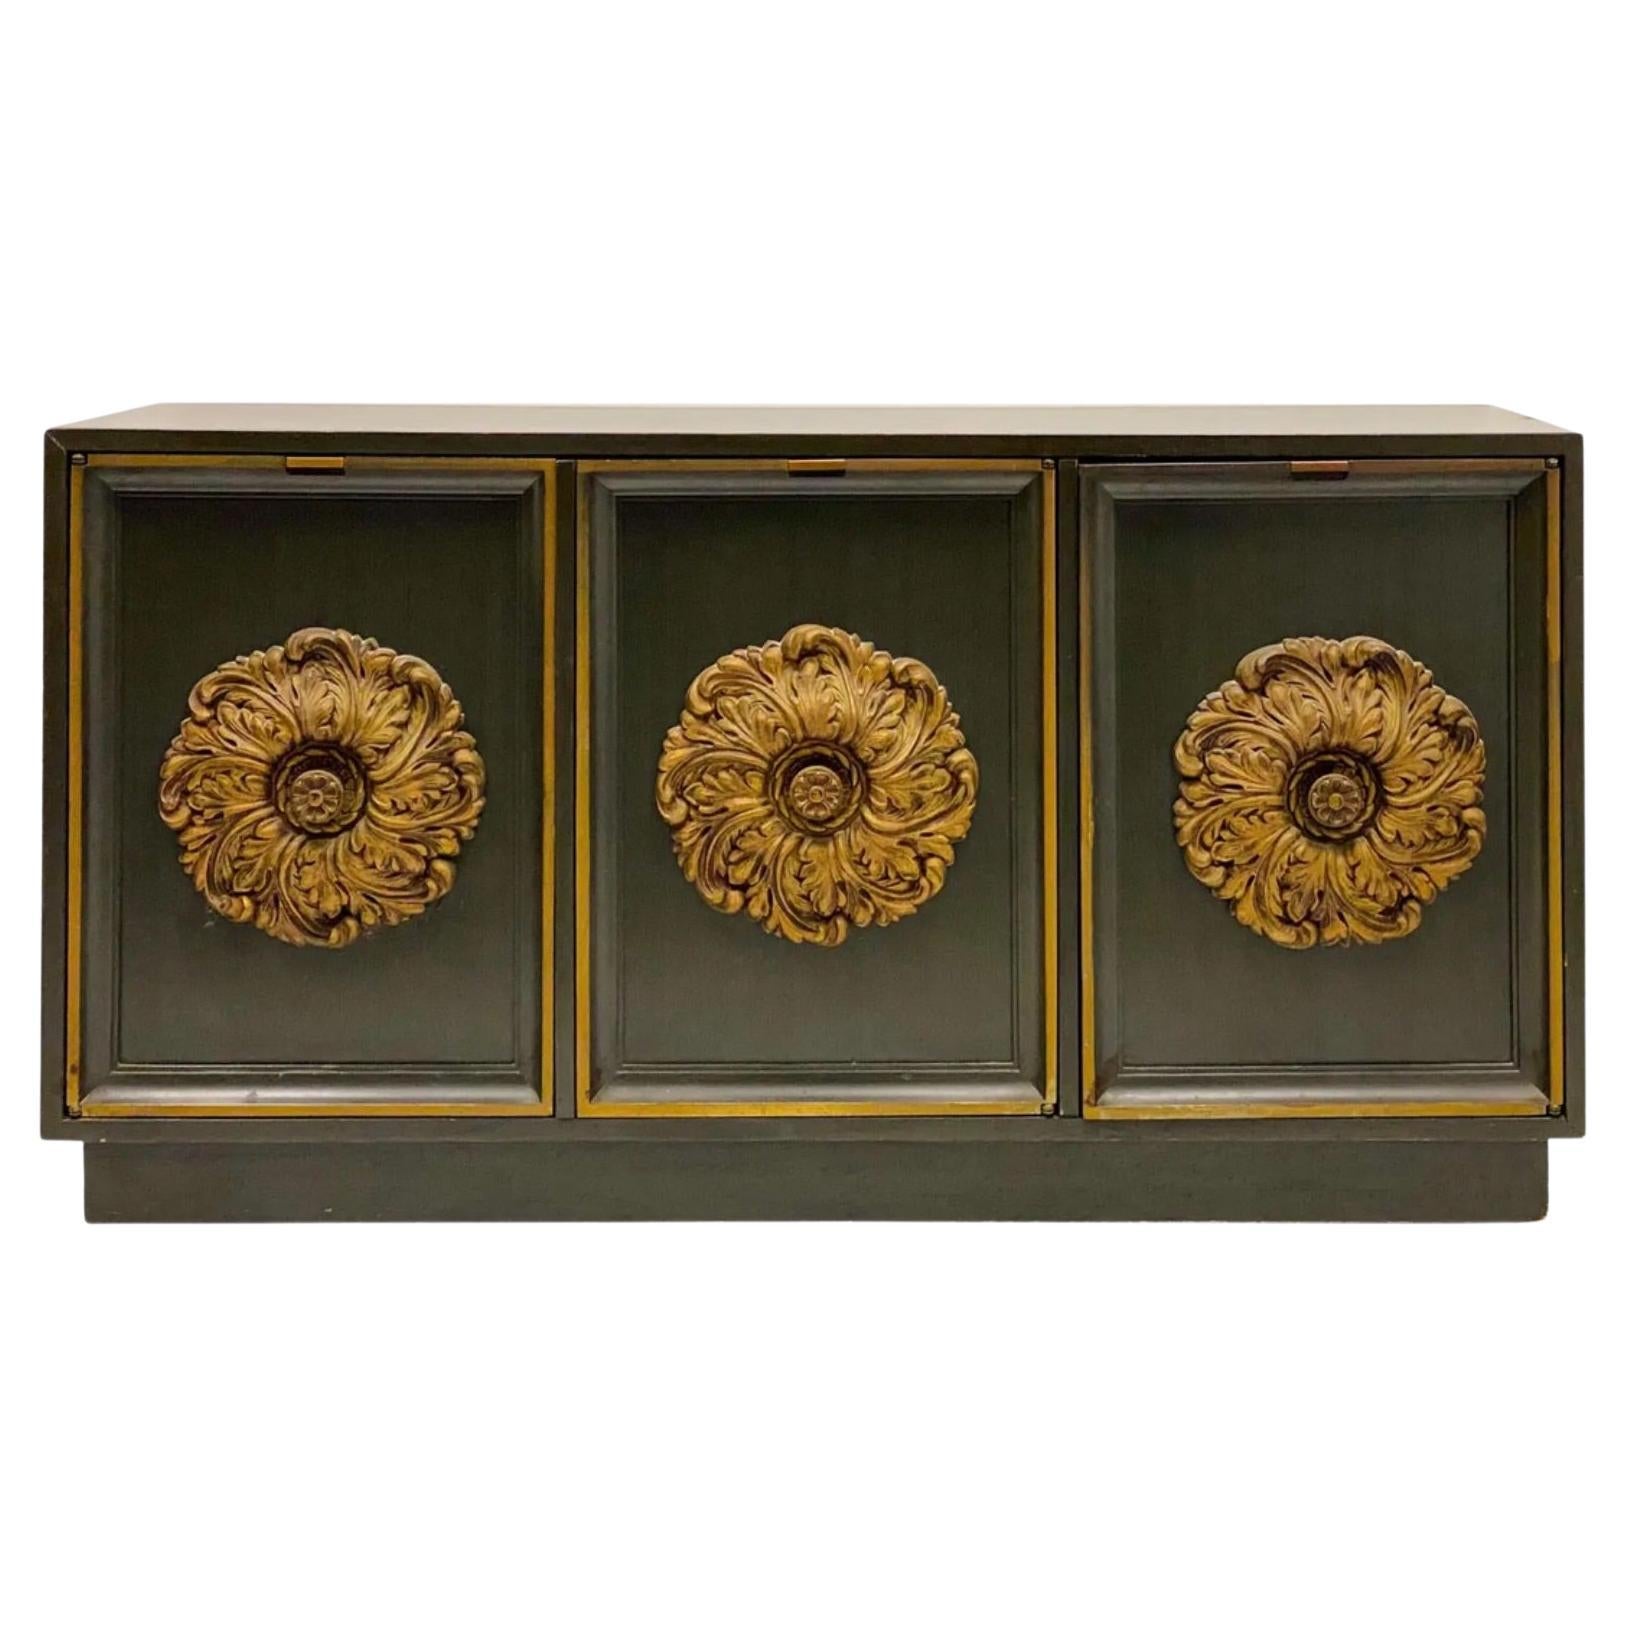 This is a rare find! It is a 1960s Hollywood Regency credenza in the manner of James Mont. it has a distressed green finish that is original. I love the over-sized gilt medallions. The interior is a single shelf. It is marked.

The $400 shipping is